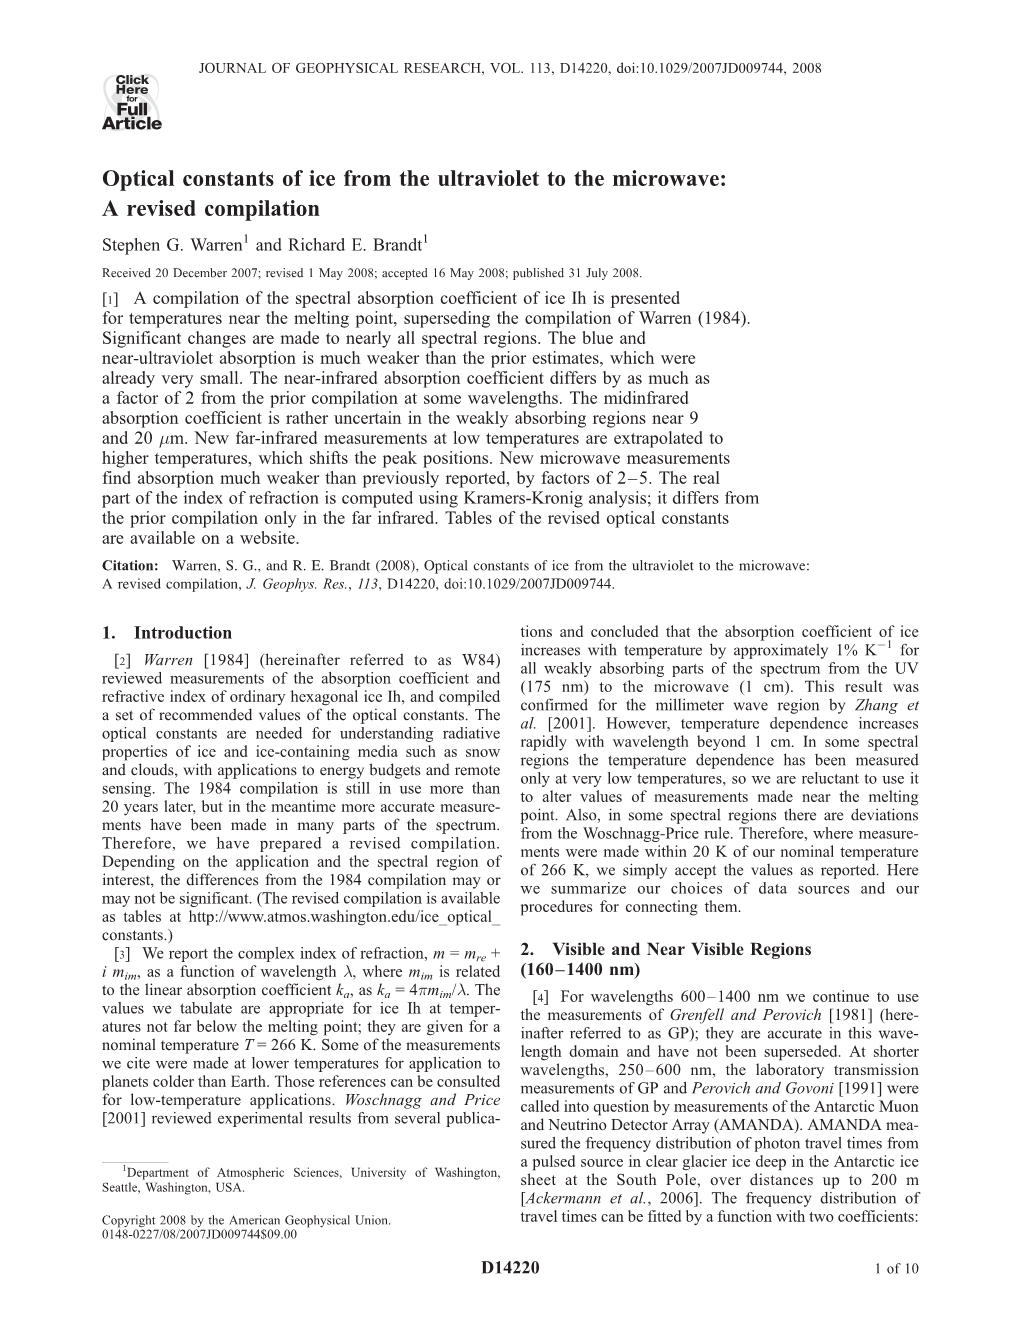 Optical Constants of Ice from the Ultraviolet to the Microwave: a Revised Compilation Stephen G